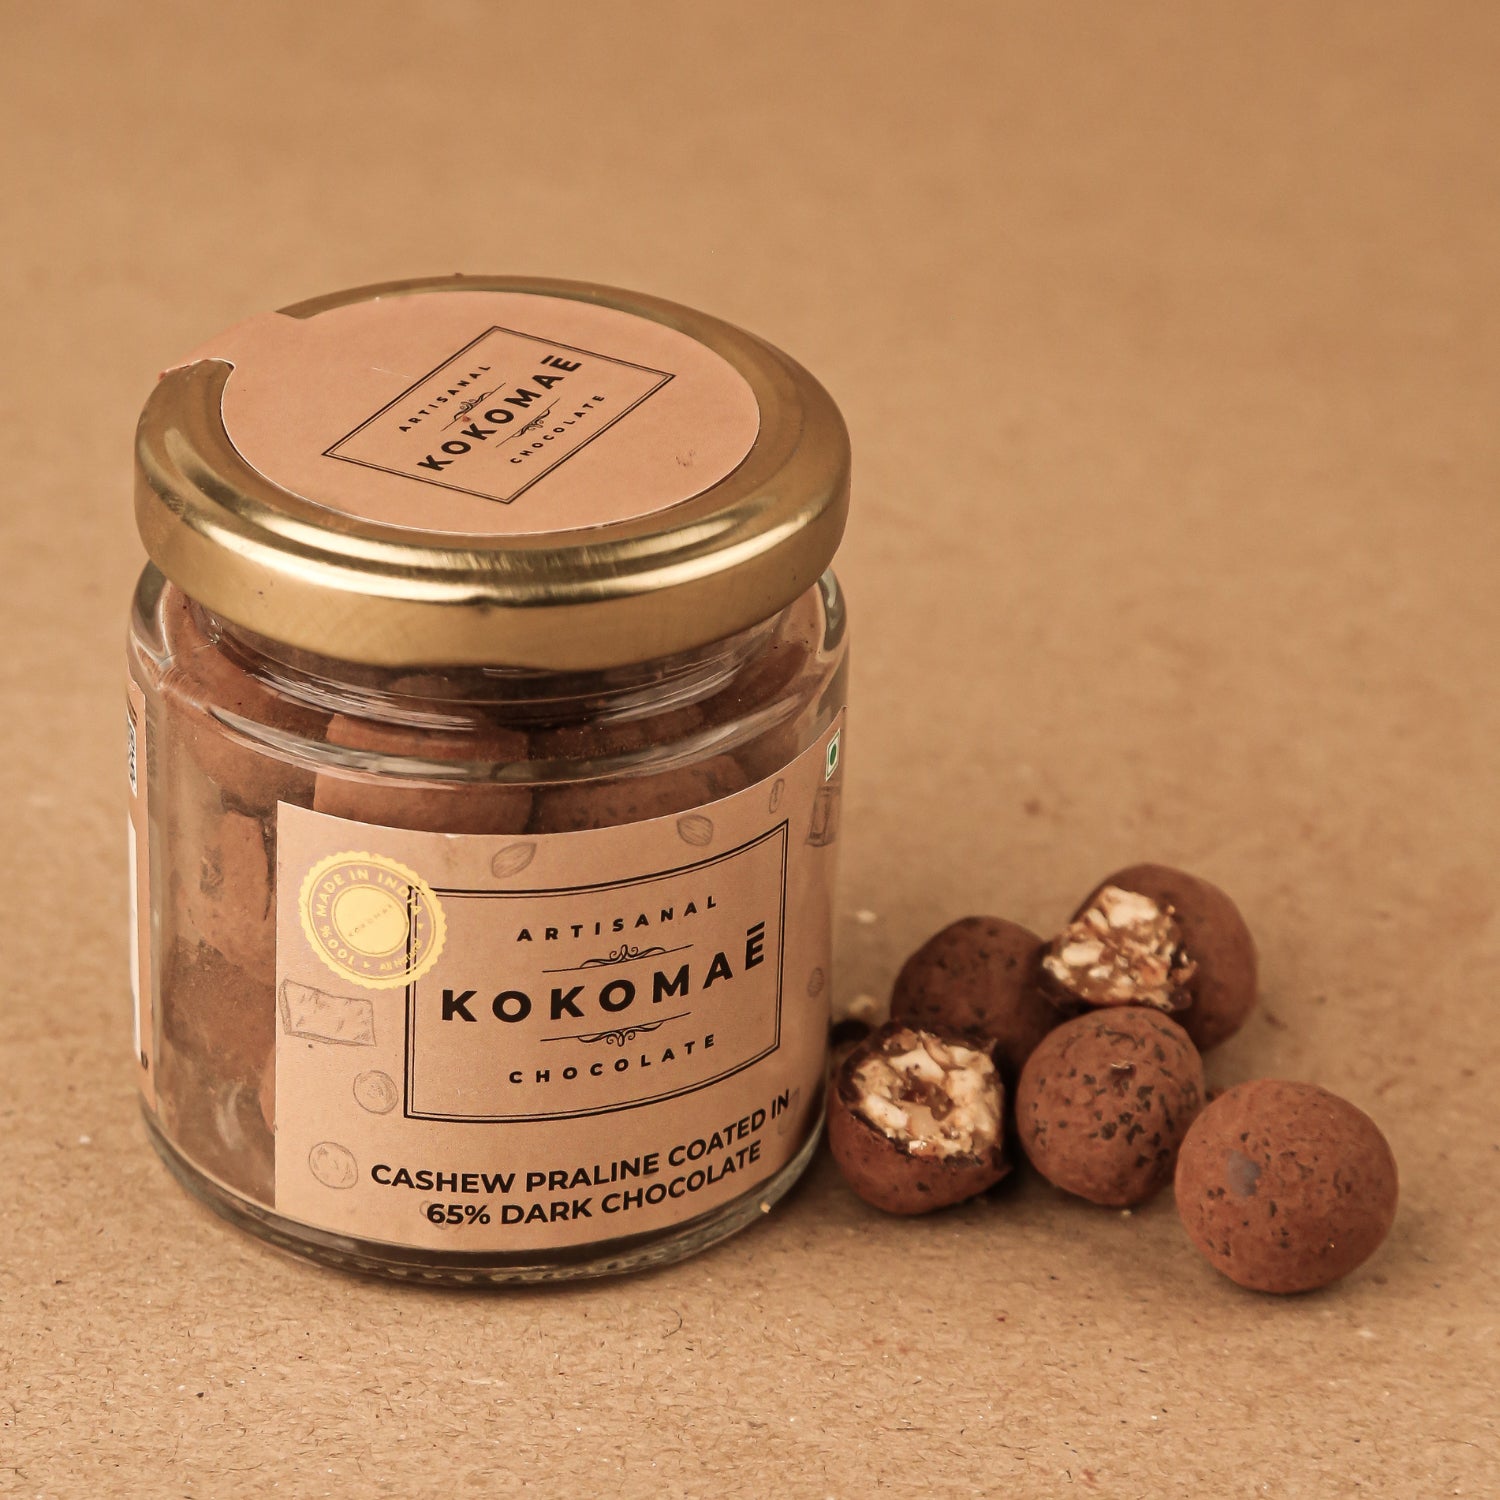 Kokomae Chocolate Gift Hamper containing Dragees with Crunchy Nuts like Blueberry, Almond and Cashew Praline Coated in Indian Chocolate